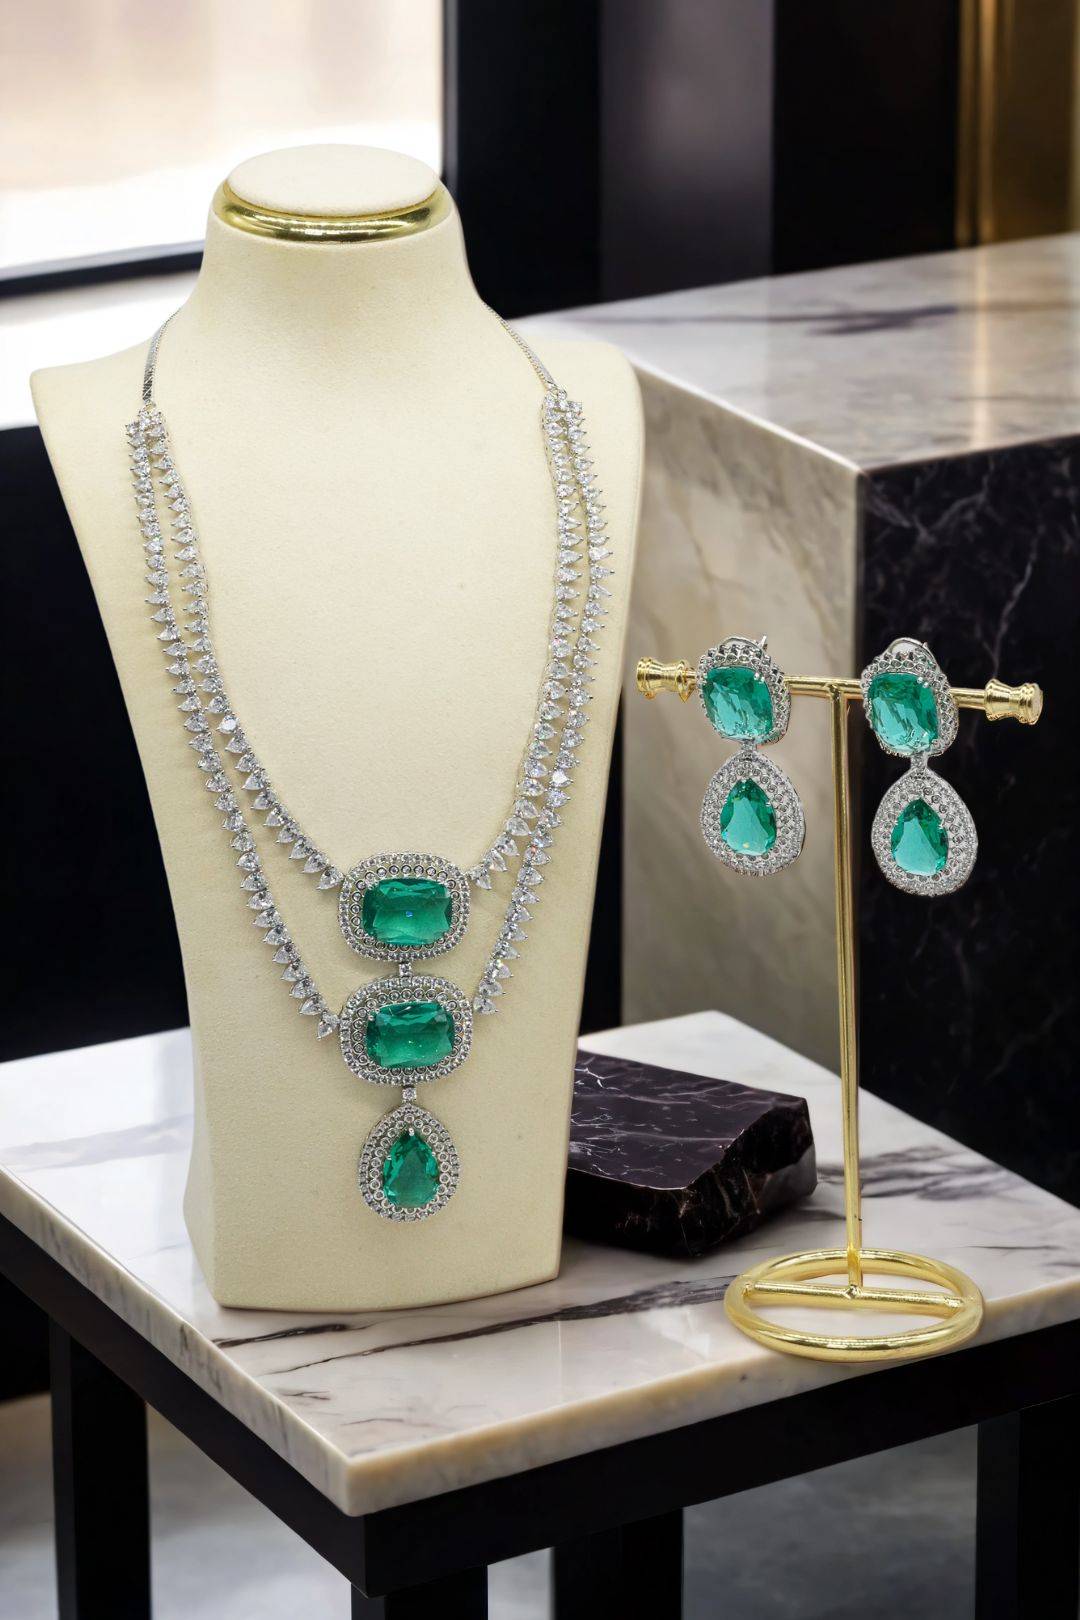 Kyna - Emerald Teardrop Statement Earrings and Necklace Set on Display